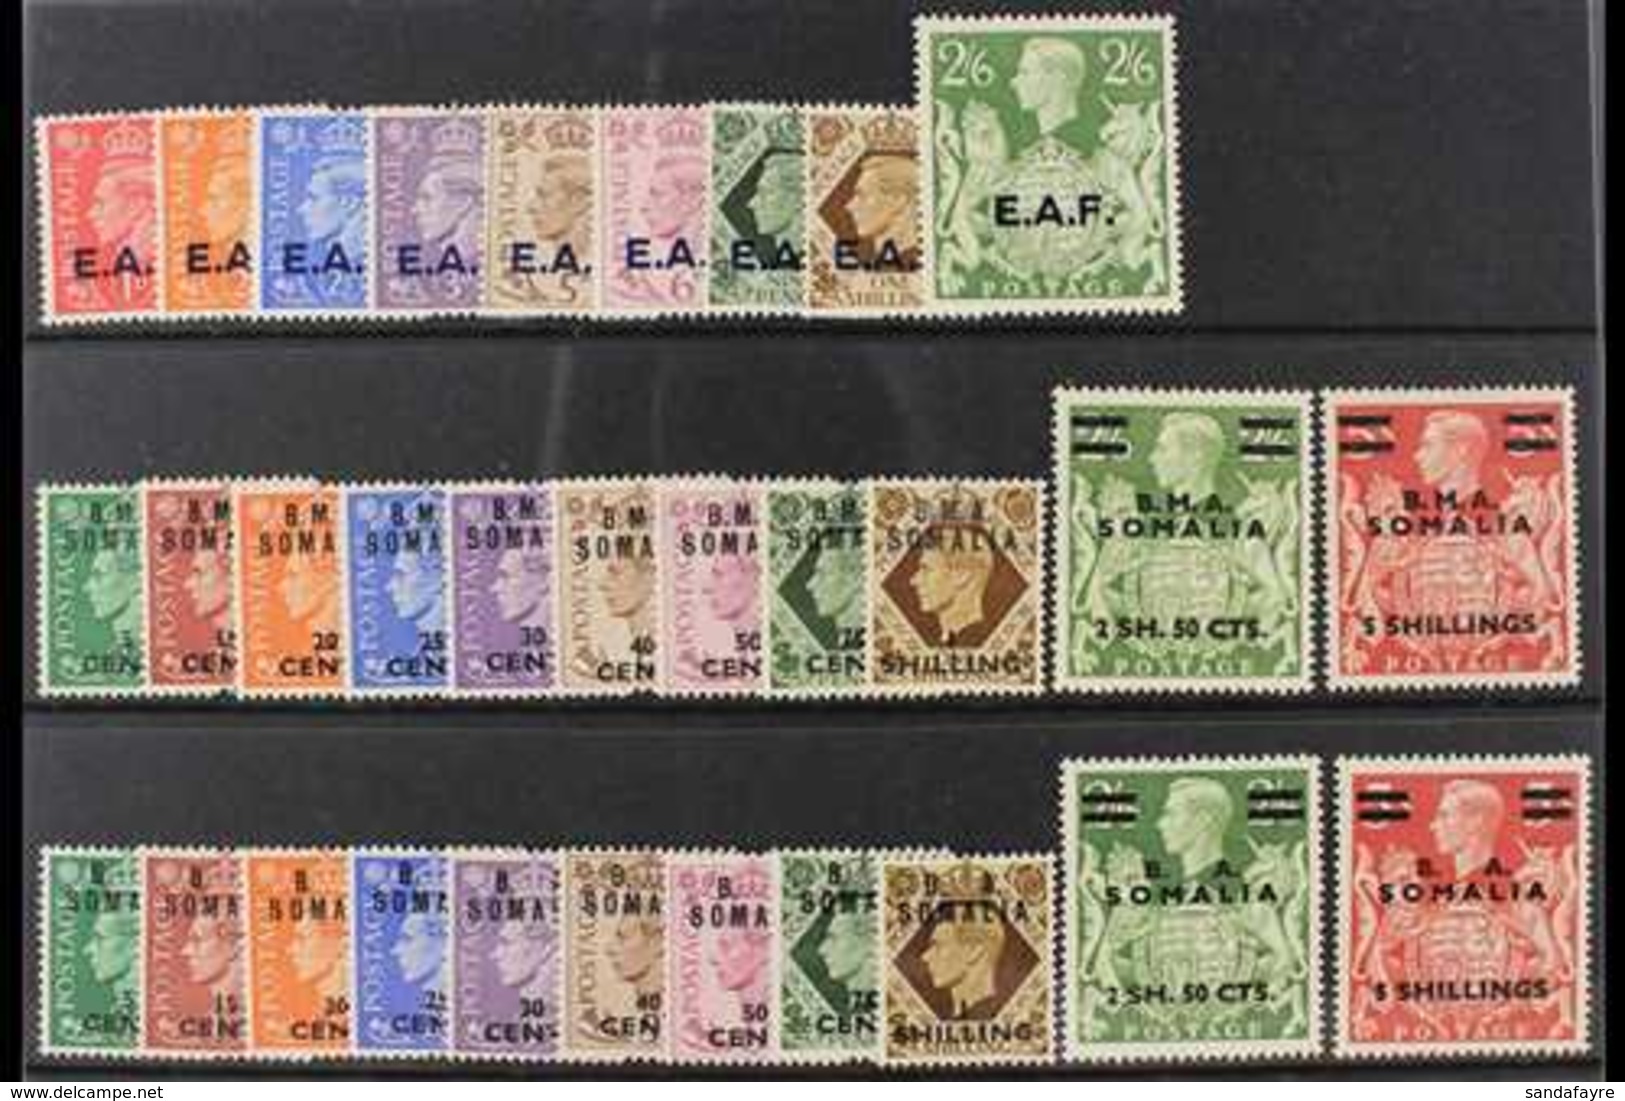 SOMALIA 1943-50 COMPLETE FINE MINT COLLECTION Presented On A Stock Card & Includes The 1938 "E.A..F." Opt'd Set, 1947 "B - Italienisch Ost-Afrika